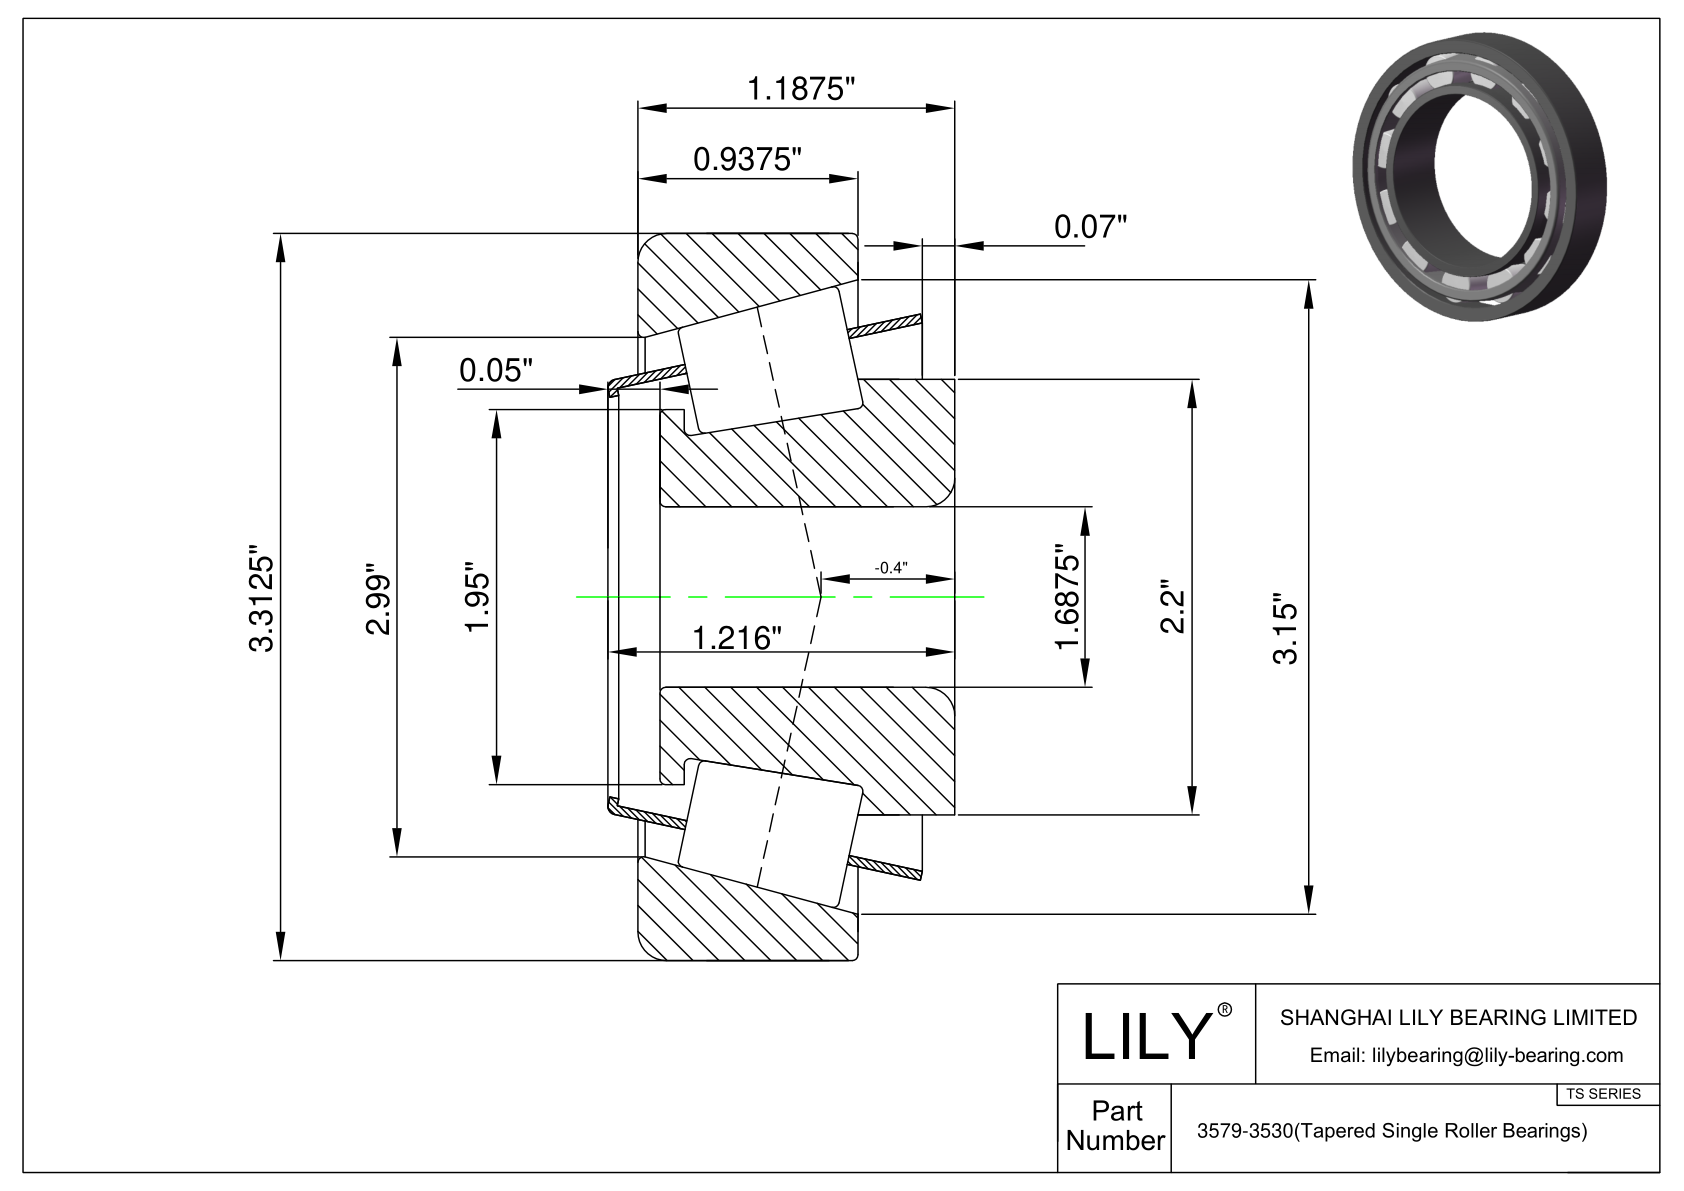 3579-3530 TS (Tapered Single Roller Bearings) (Imperial) cad drawing